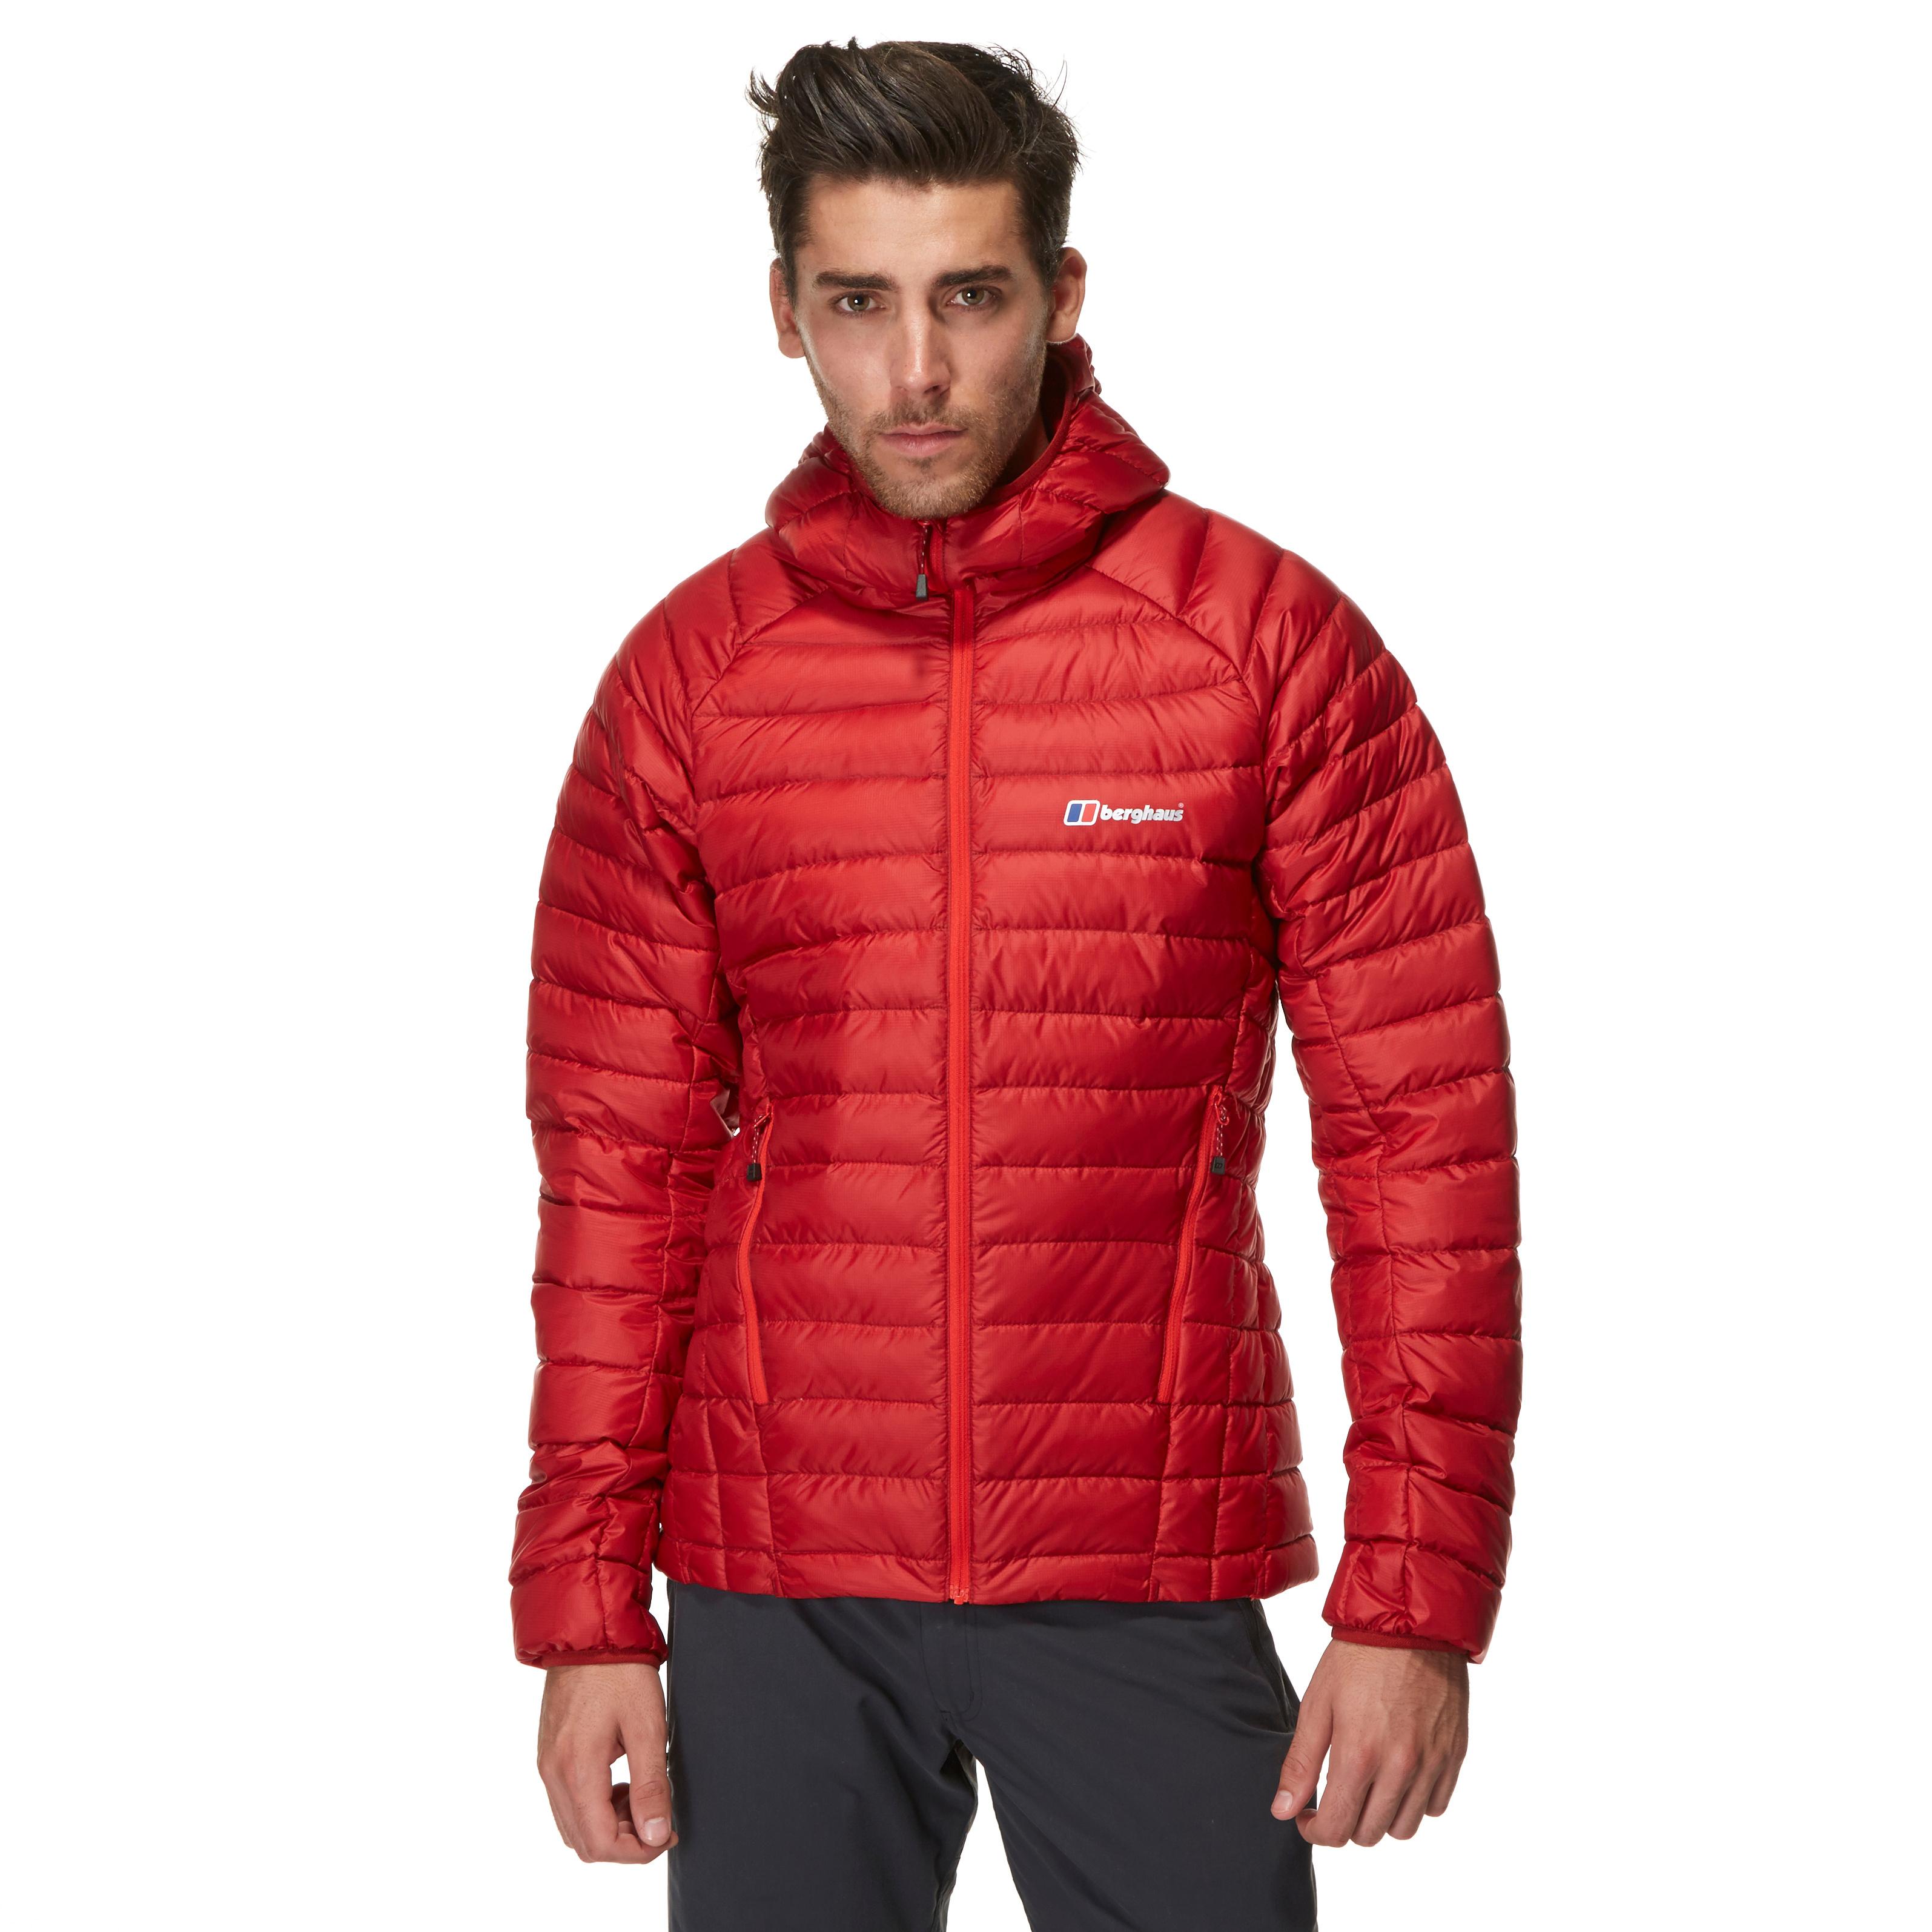 Berghaus Mens Furnace Down Jacket Outdoor Clothing Red | eBay